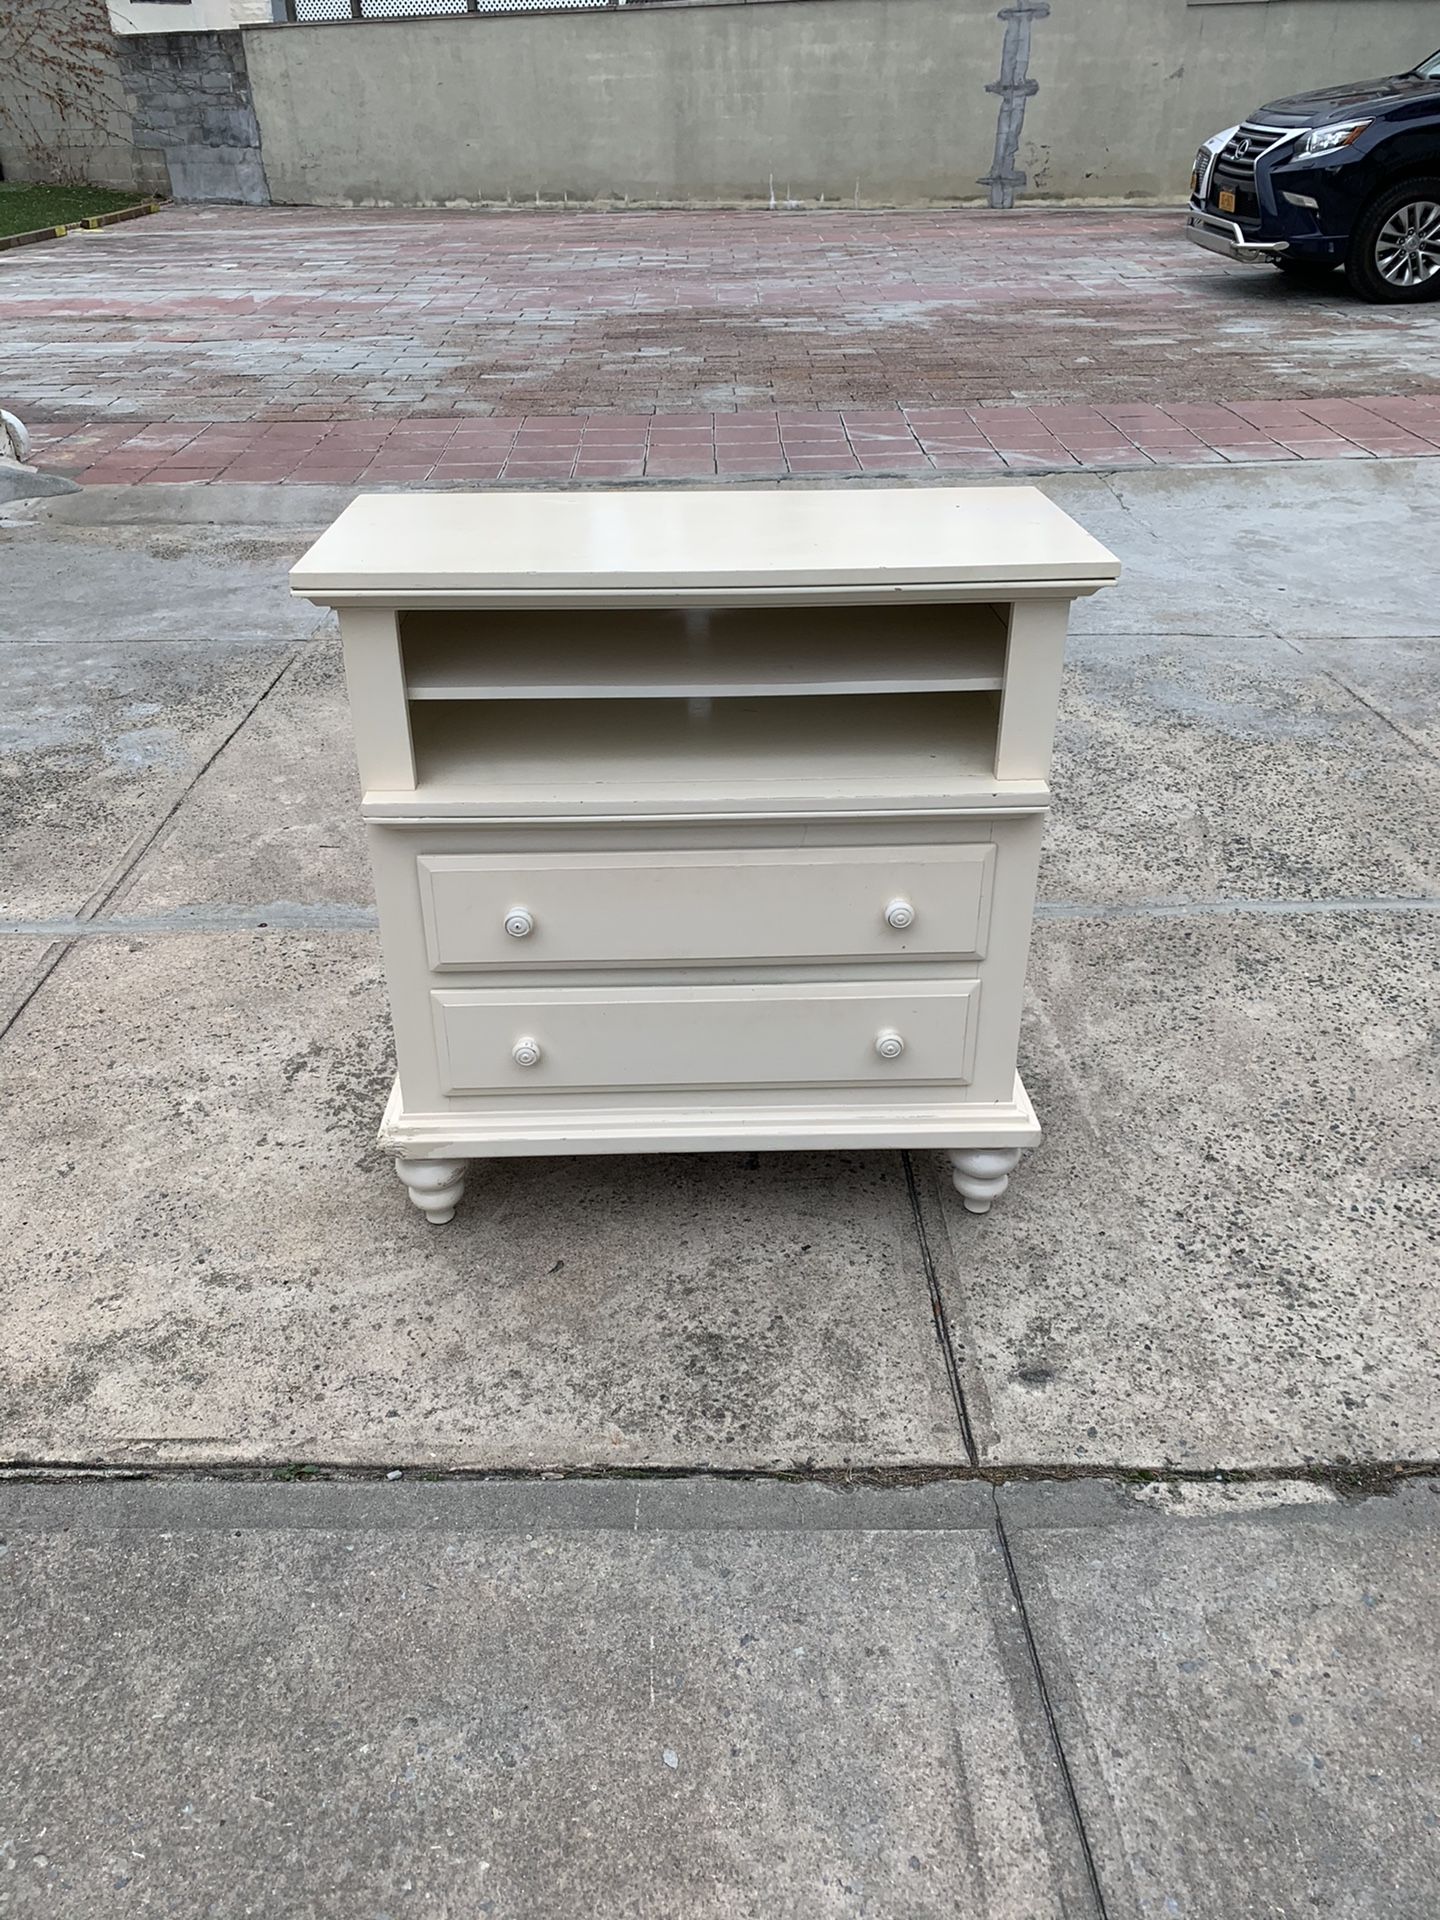 Off white wood dresser with storage shelves